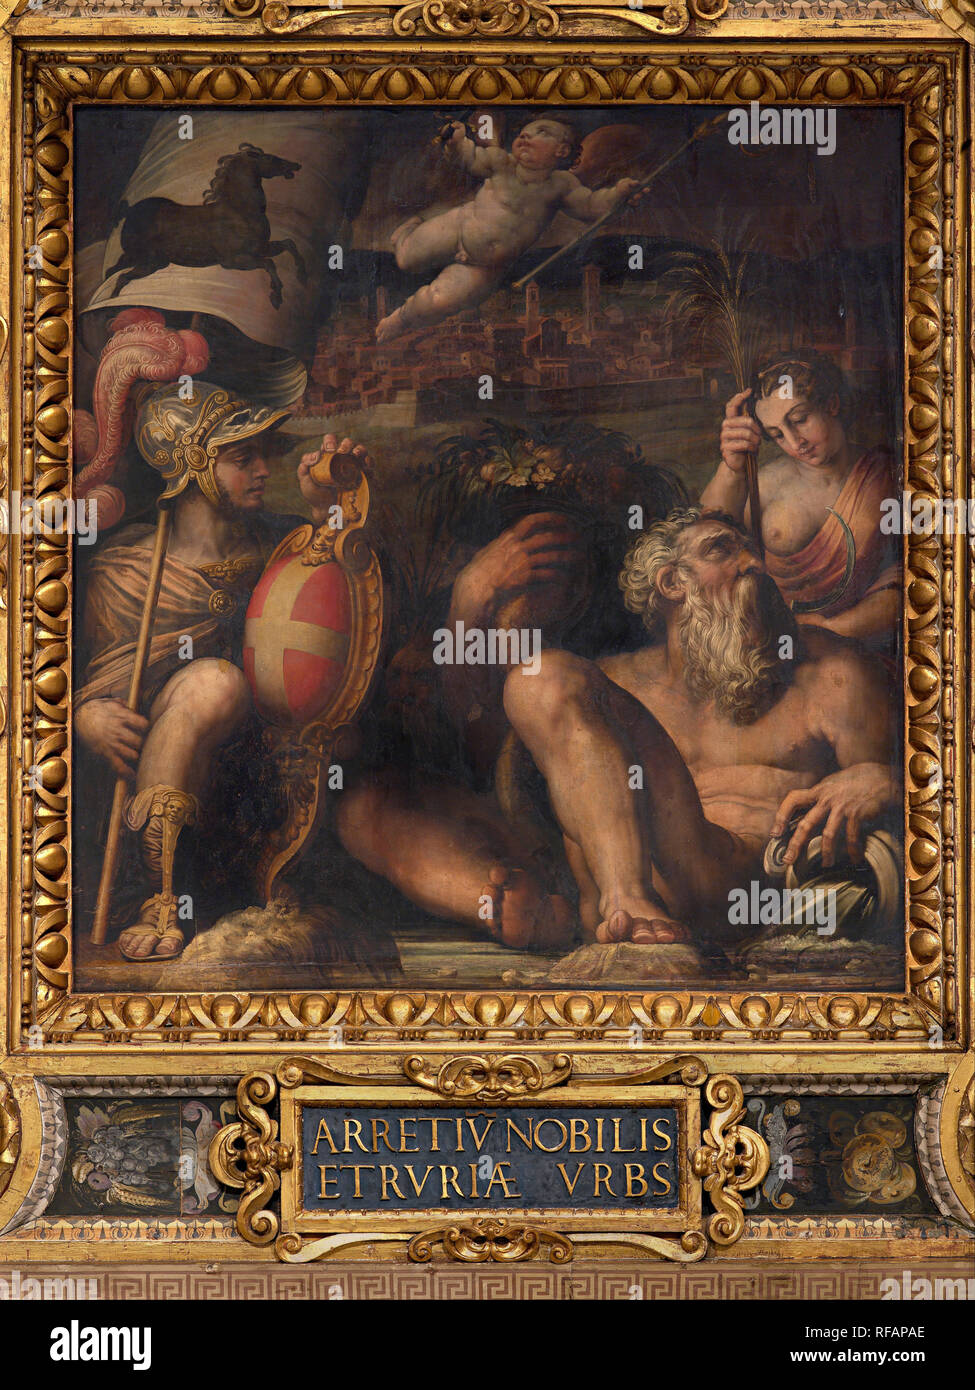 Allegory of Arezzo. Date/Period: 1563 - 1565. Oil painting on wood. Height: 250 mm (9.84 in); Width: 250 mm (9.84 in). Author: Giorgio Vasari. VASARI, GIORGIO. Stock Photo